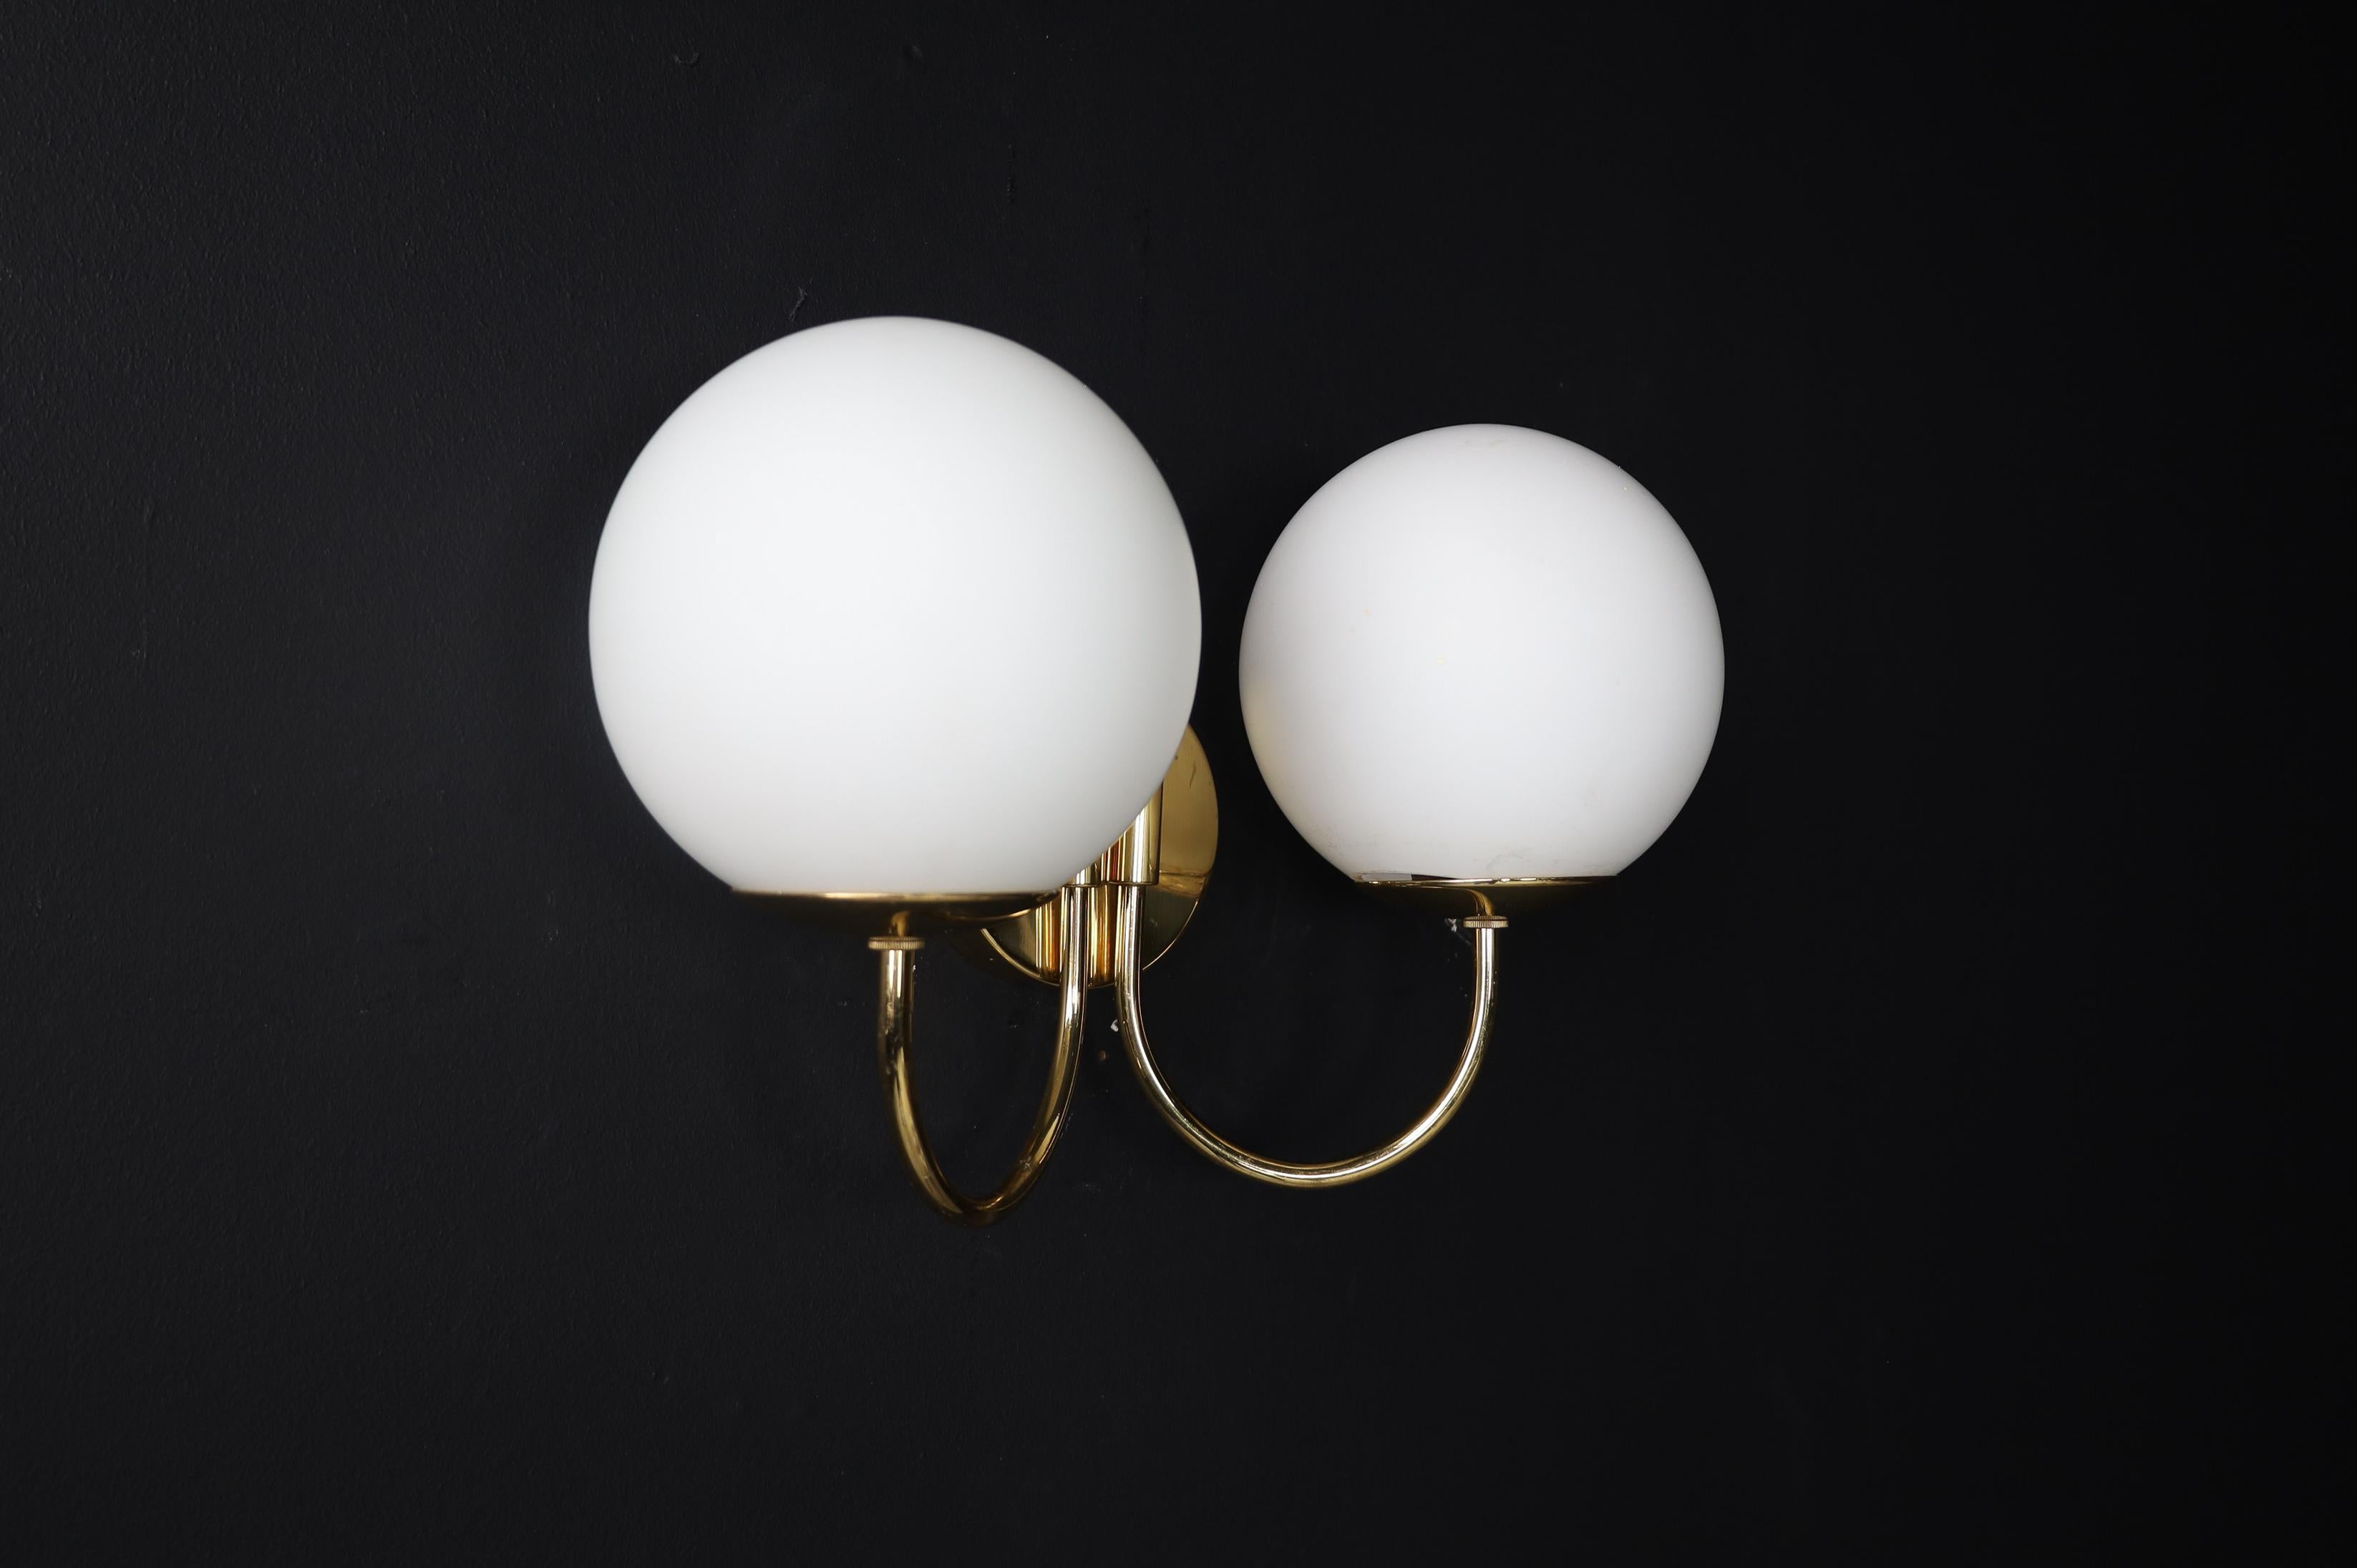 Elegant Sconces with Brass Fixtures and Opaline Glass Globes, Italy, 1960s For Sale 1